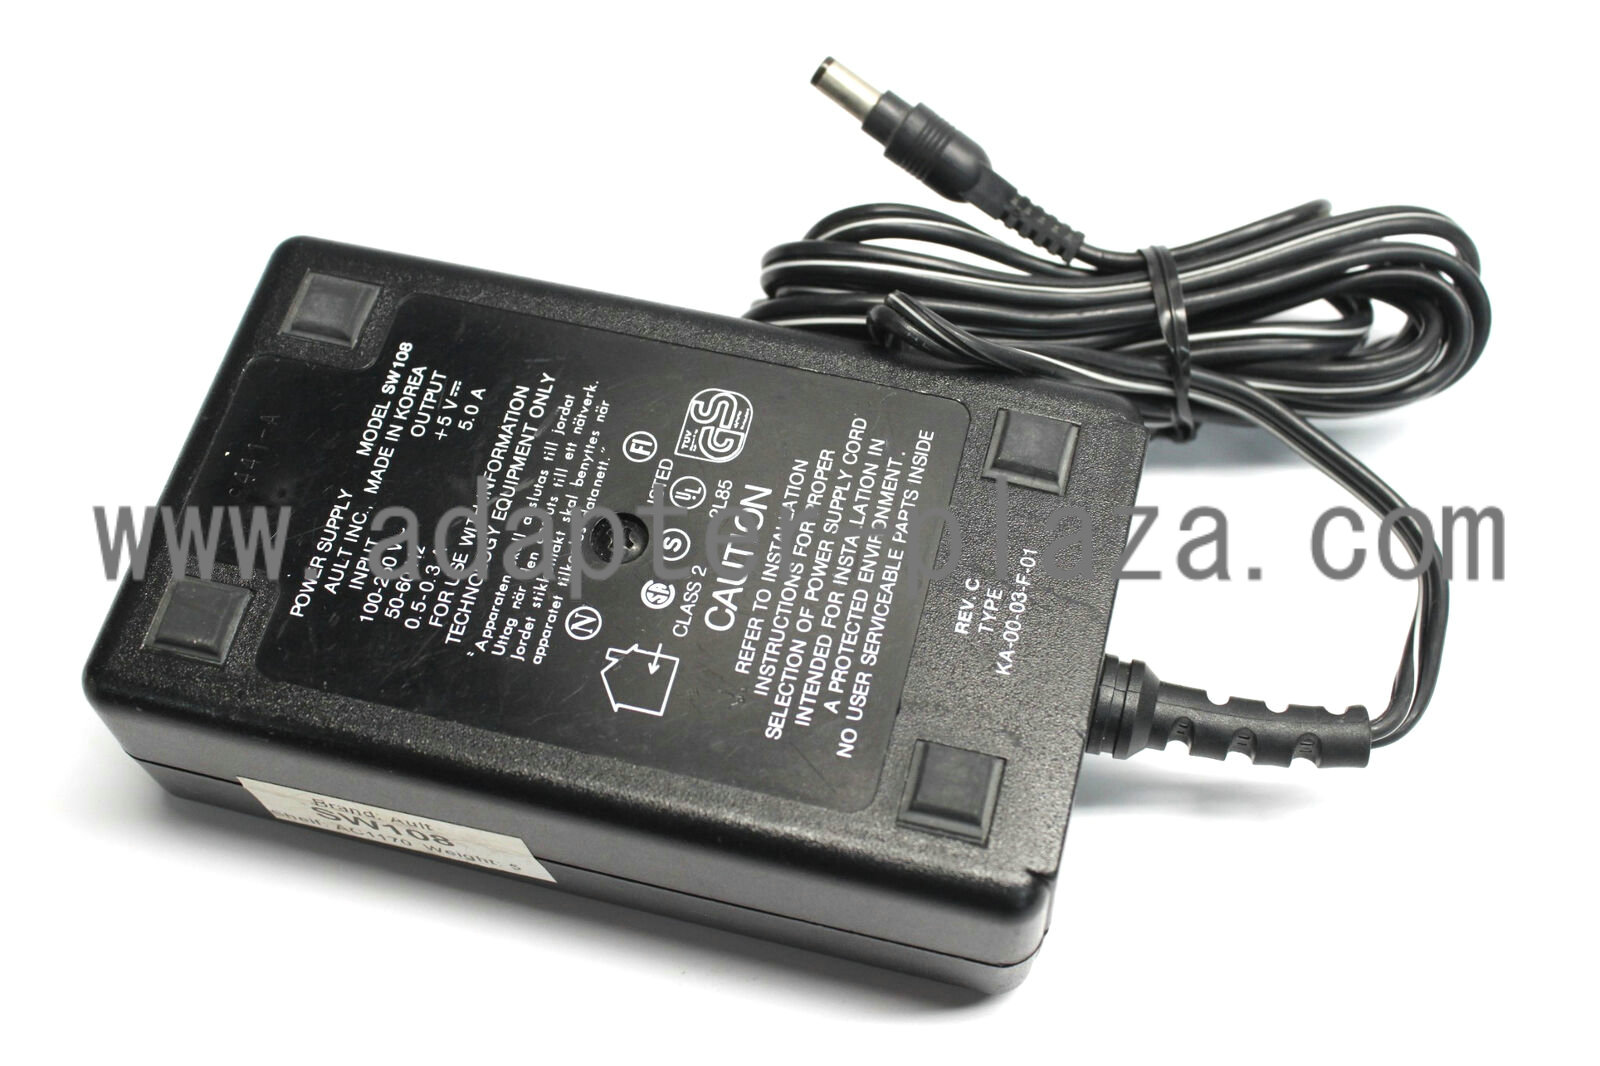 New Ault SW108 DC 5V 5.0A Class 2 Power Supply AC Adapter - Click Image to Close